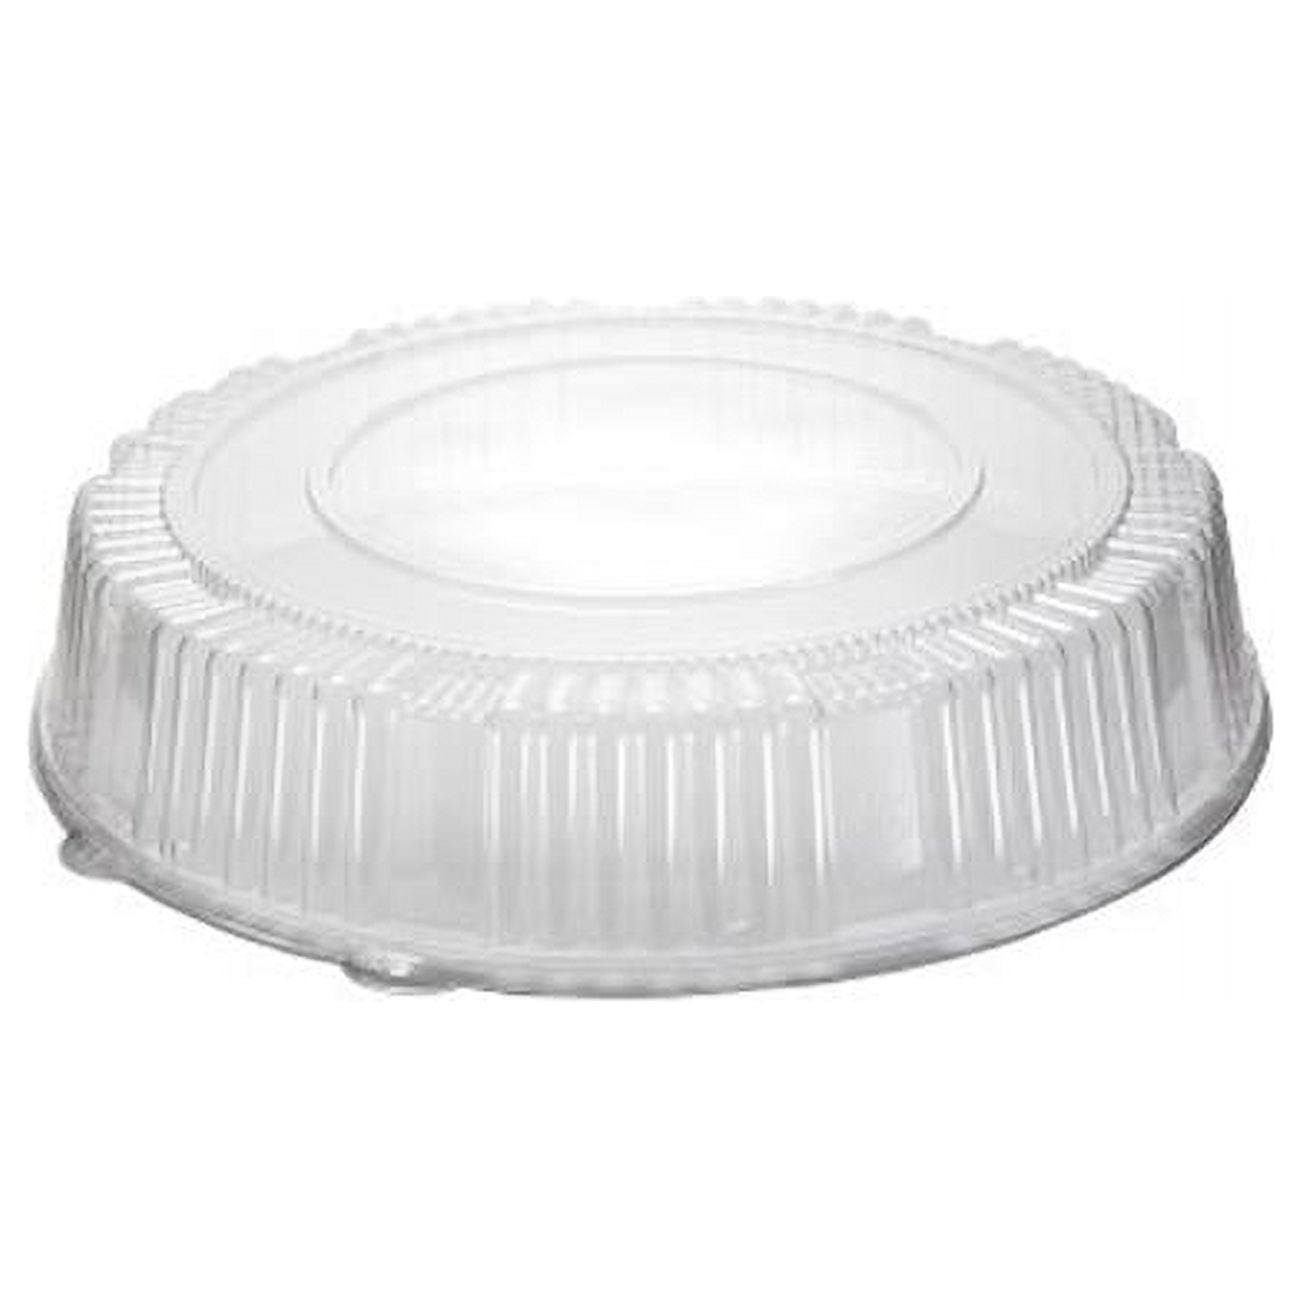 A16petdm Cpc 16 In. Standard Height Dome Lid - Case Of 25